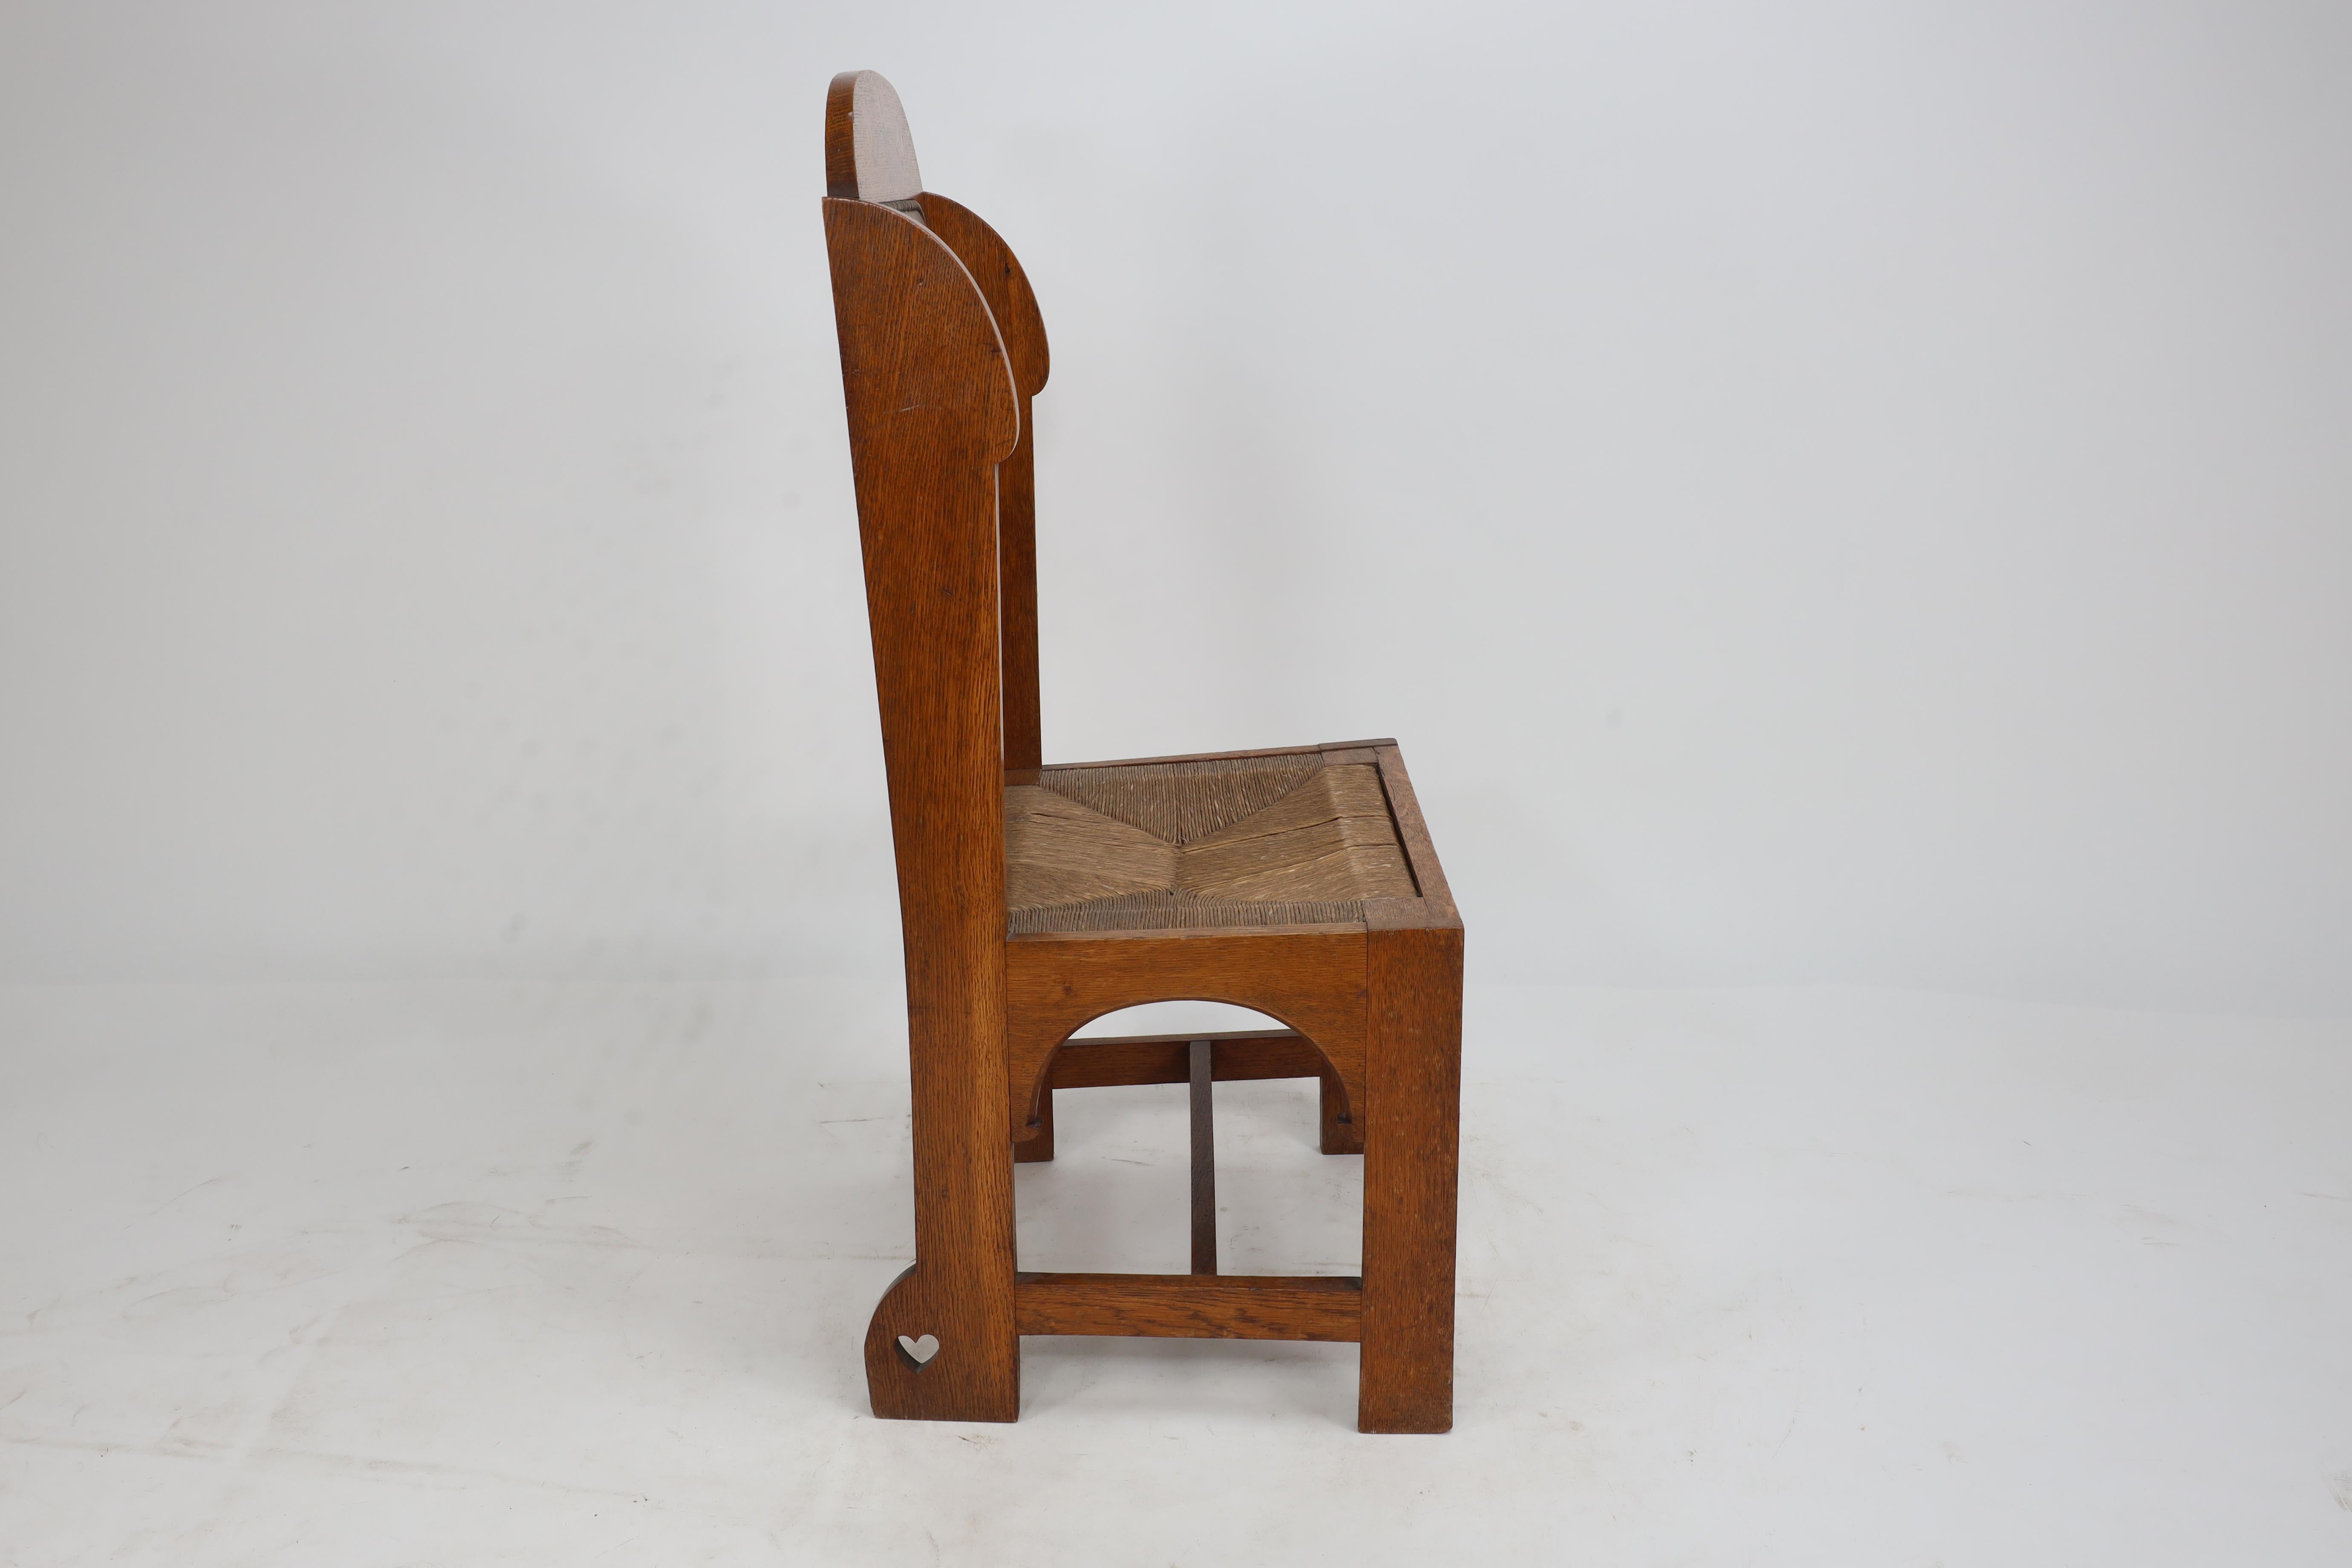 English E G Punnet attributed. Probably made by William Birch. An oak wing back chair For Sale